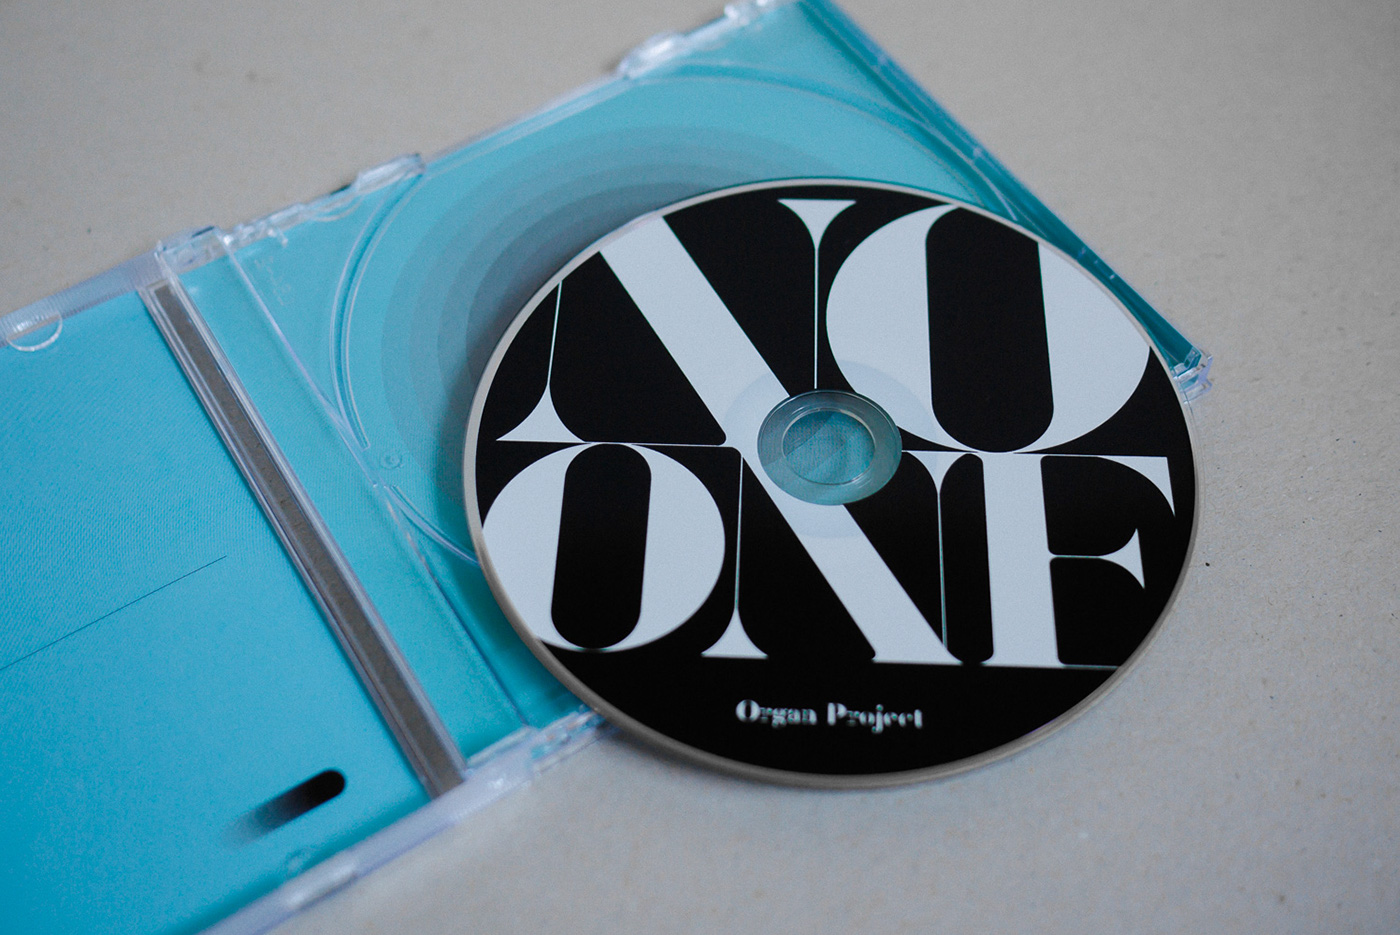 Packaging organ Project cd Album taiwan design lightseagreen music cover